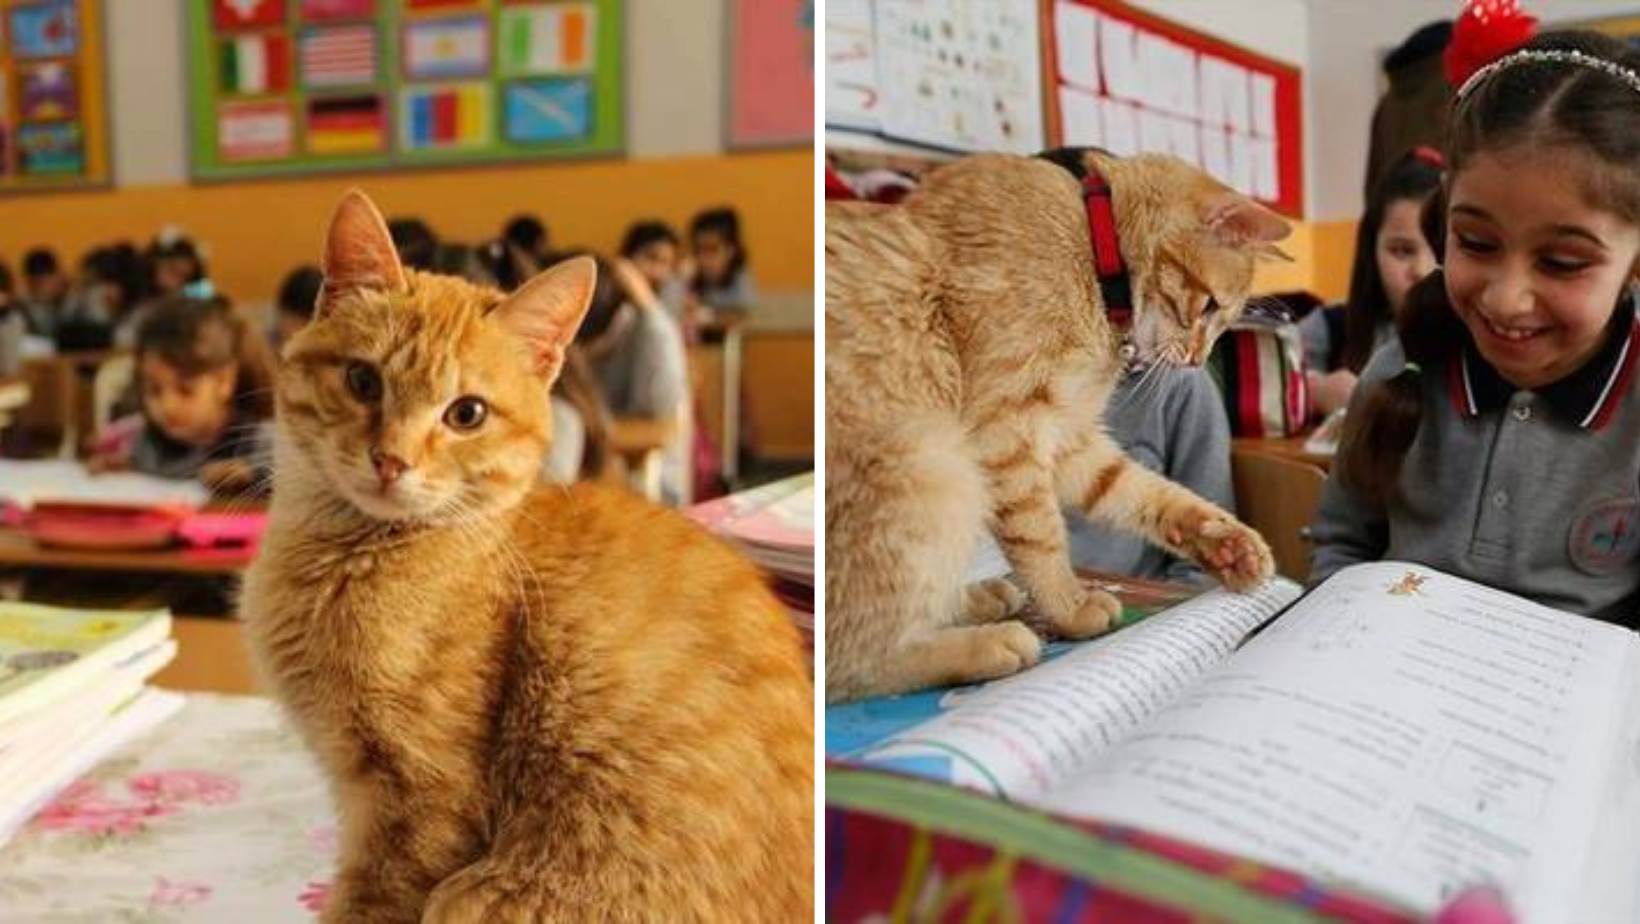 A Stray Cat Finds His Way Into A Classroom And Doesn't Want To Leave